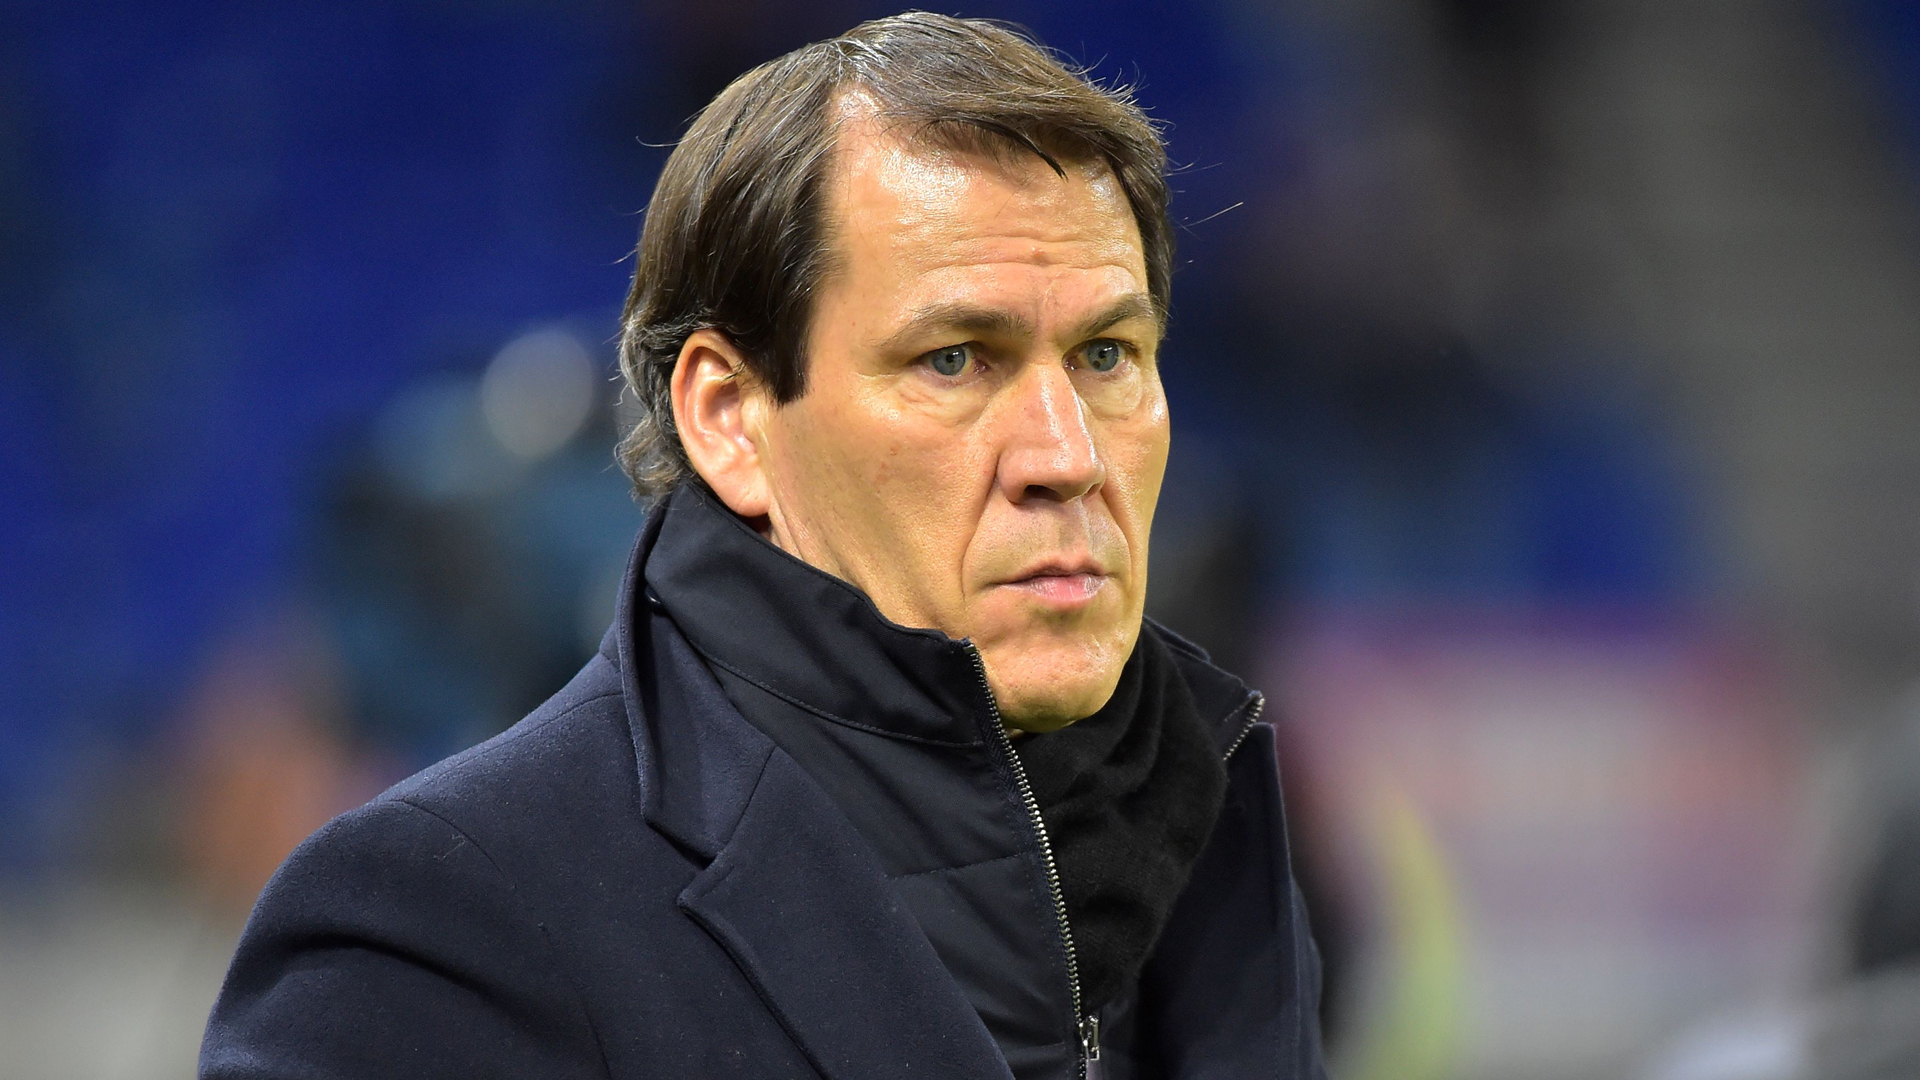 While happy with Lyon's performance against Juventus, Rudi Garcia knows they still have work to do.